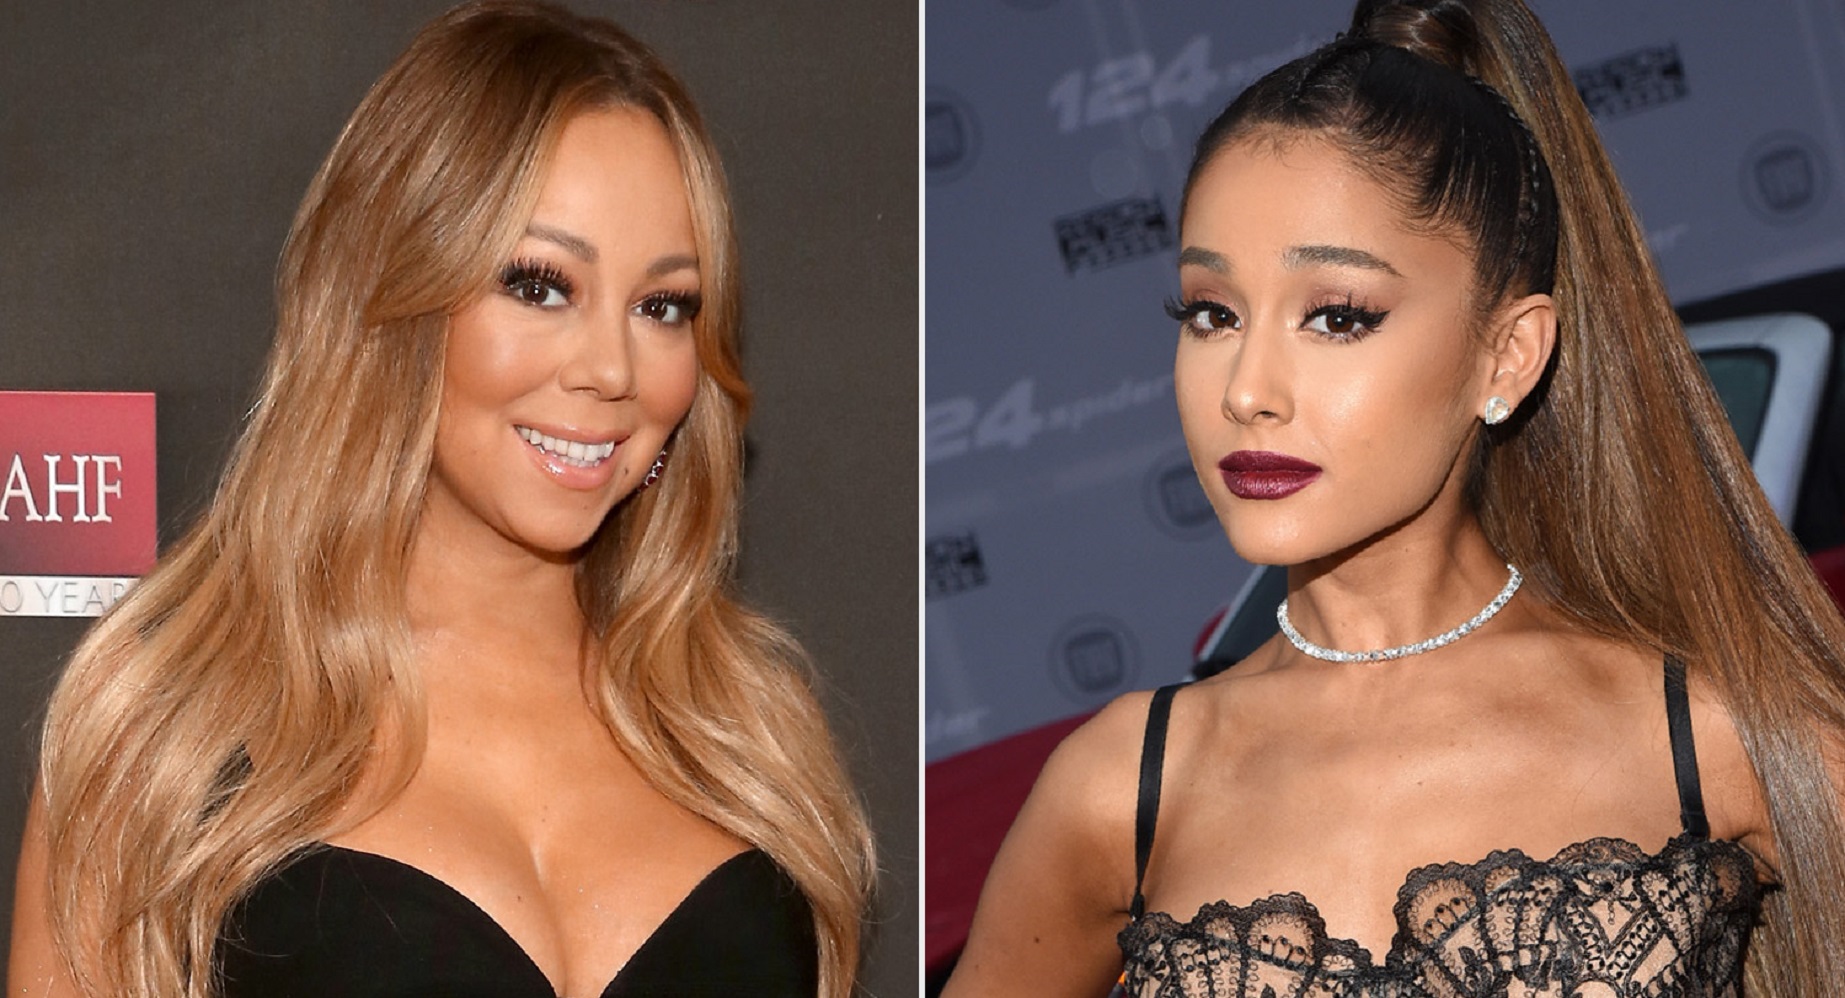 Who’s The Better Singer – Ariana Grande Or Mariah Carey? Vote Here!